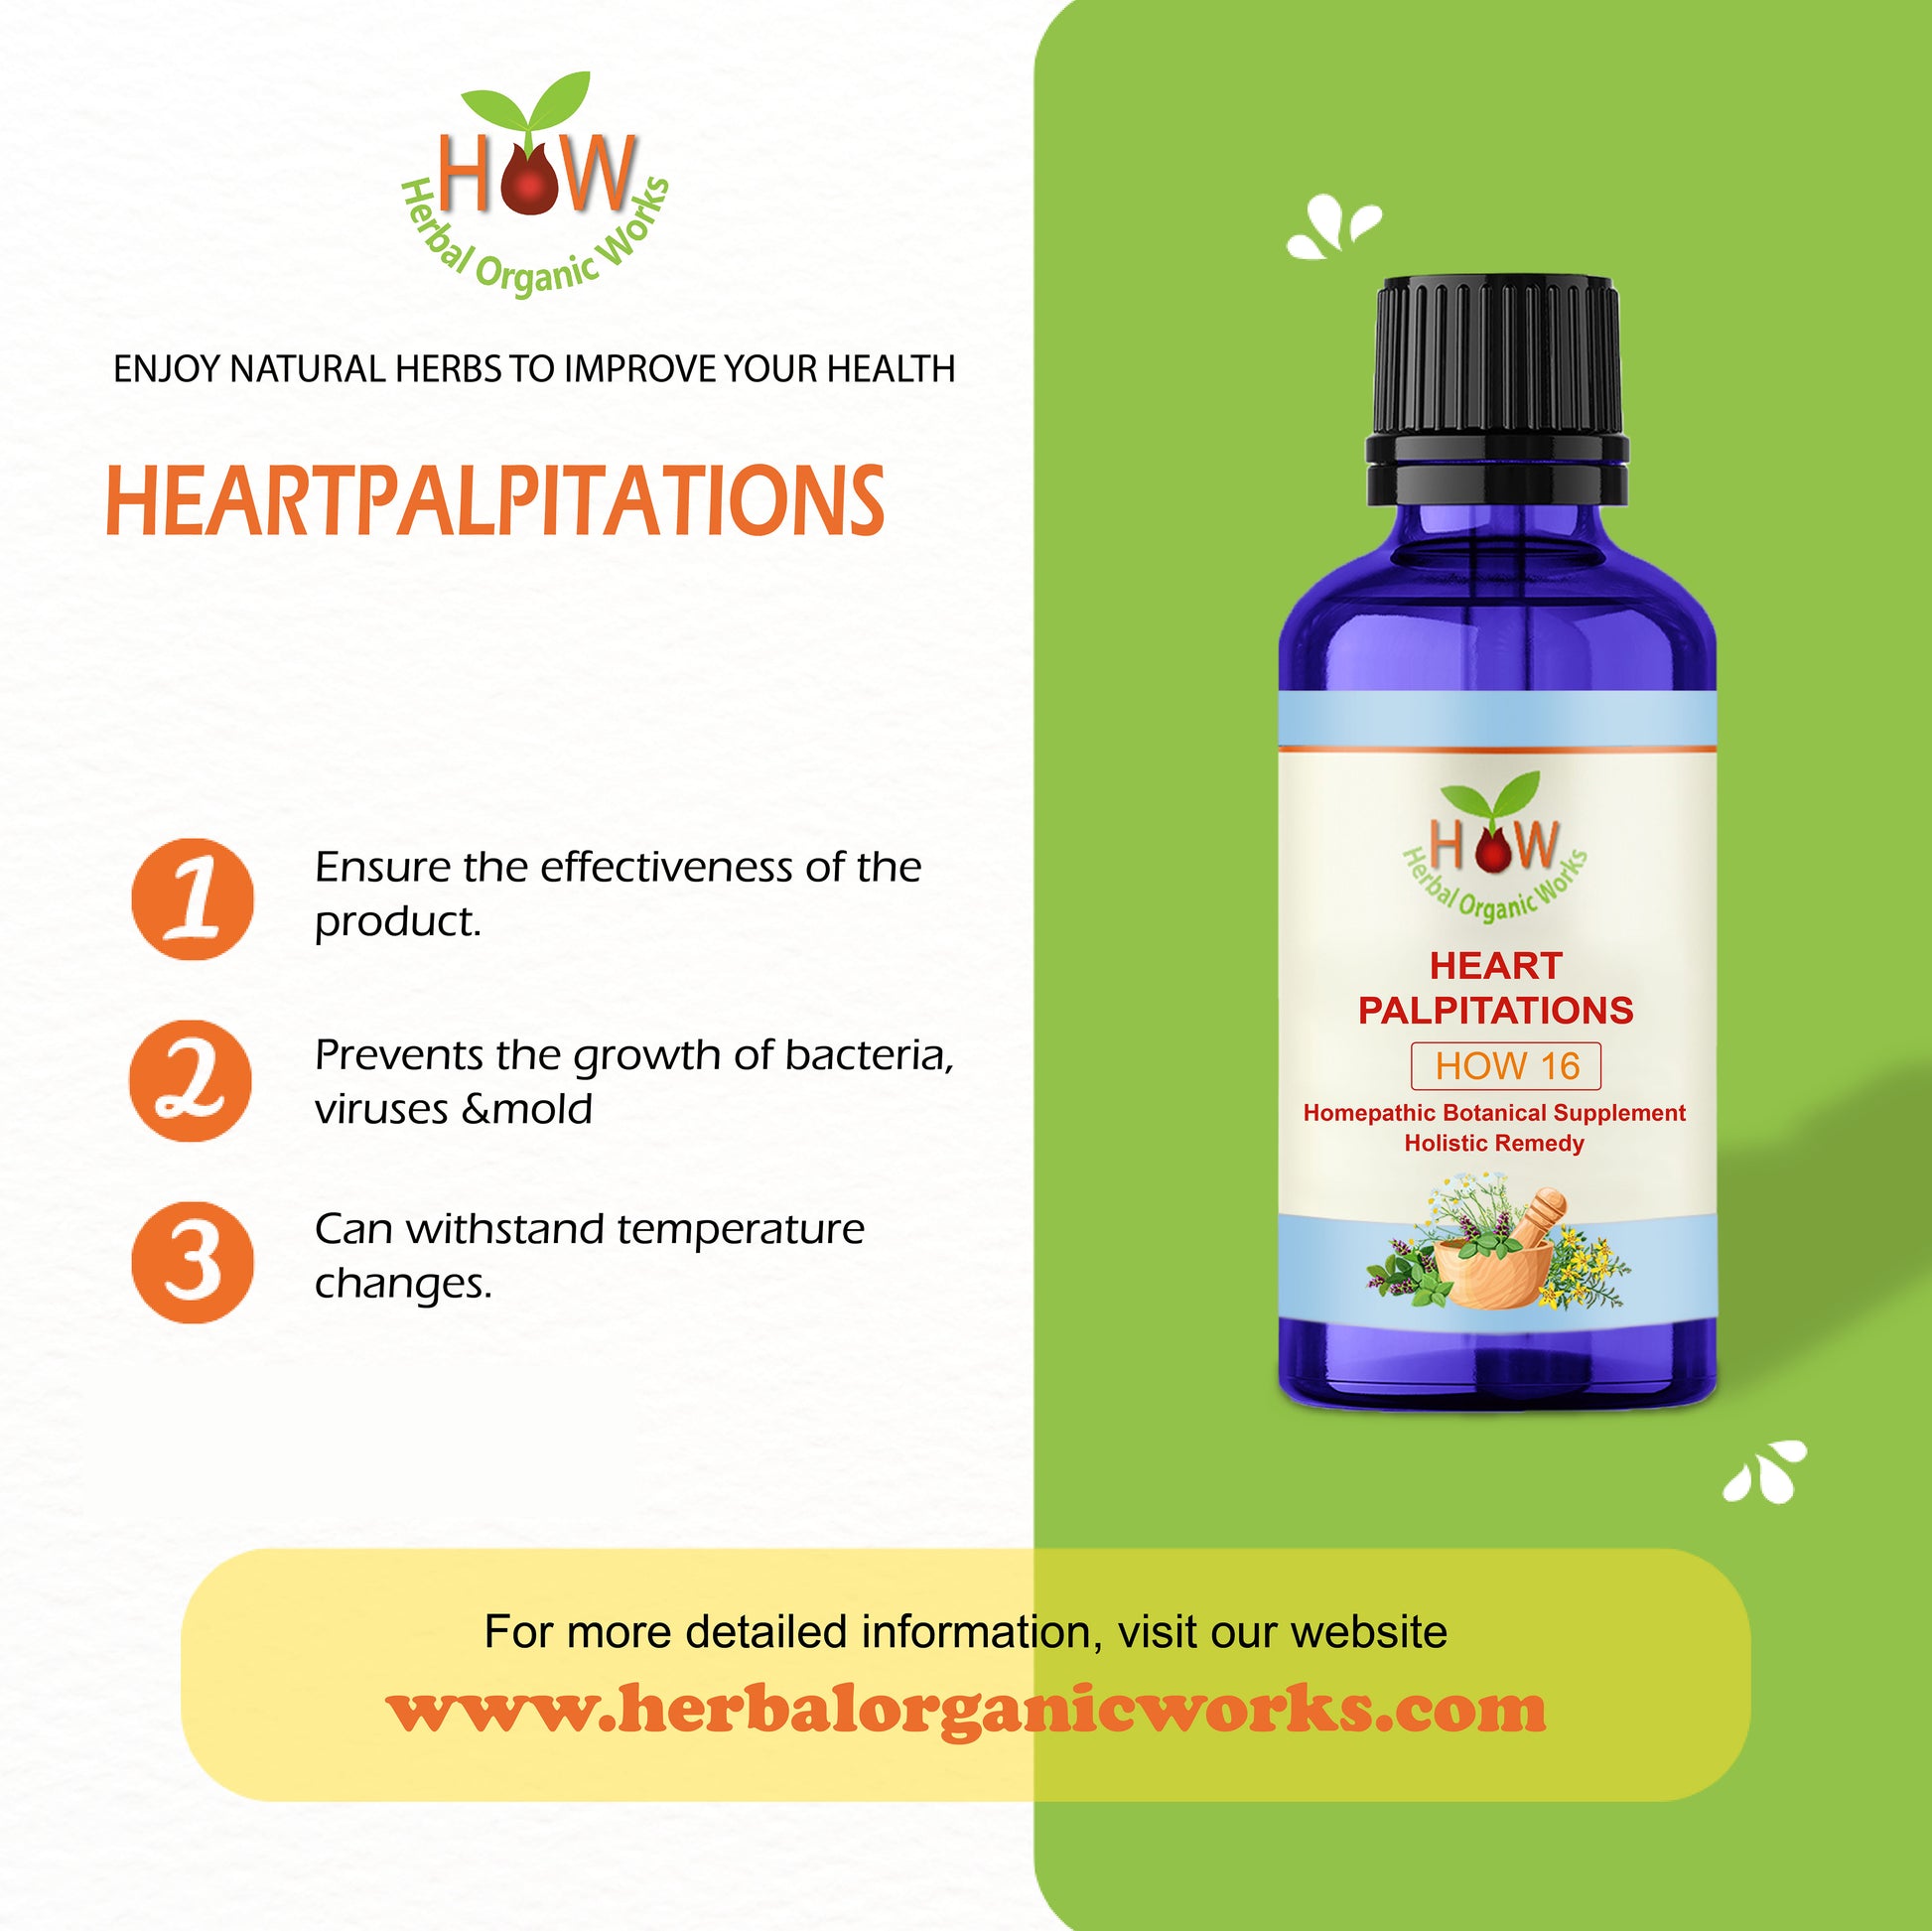 REMEDY FOR ABNORMAL HEART PALPITATION (HOW16)